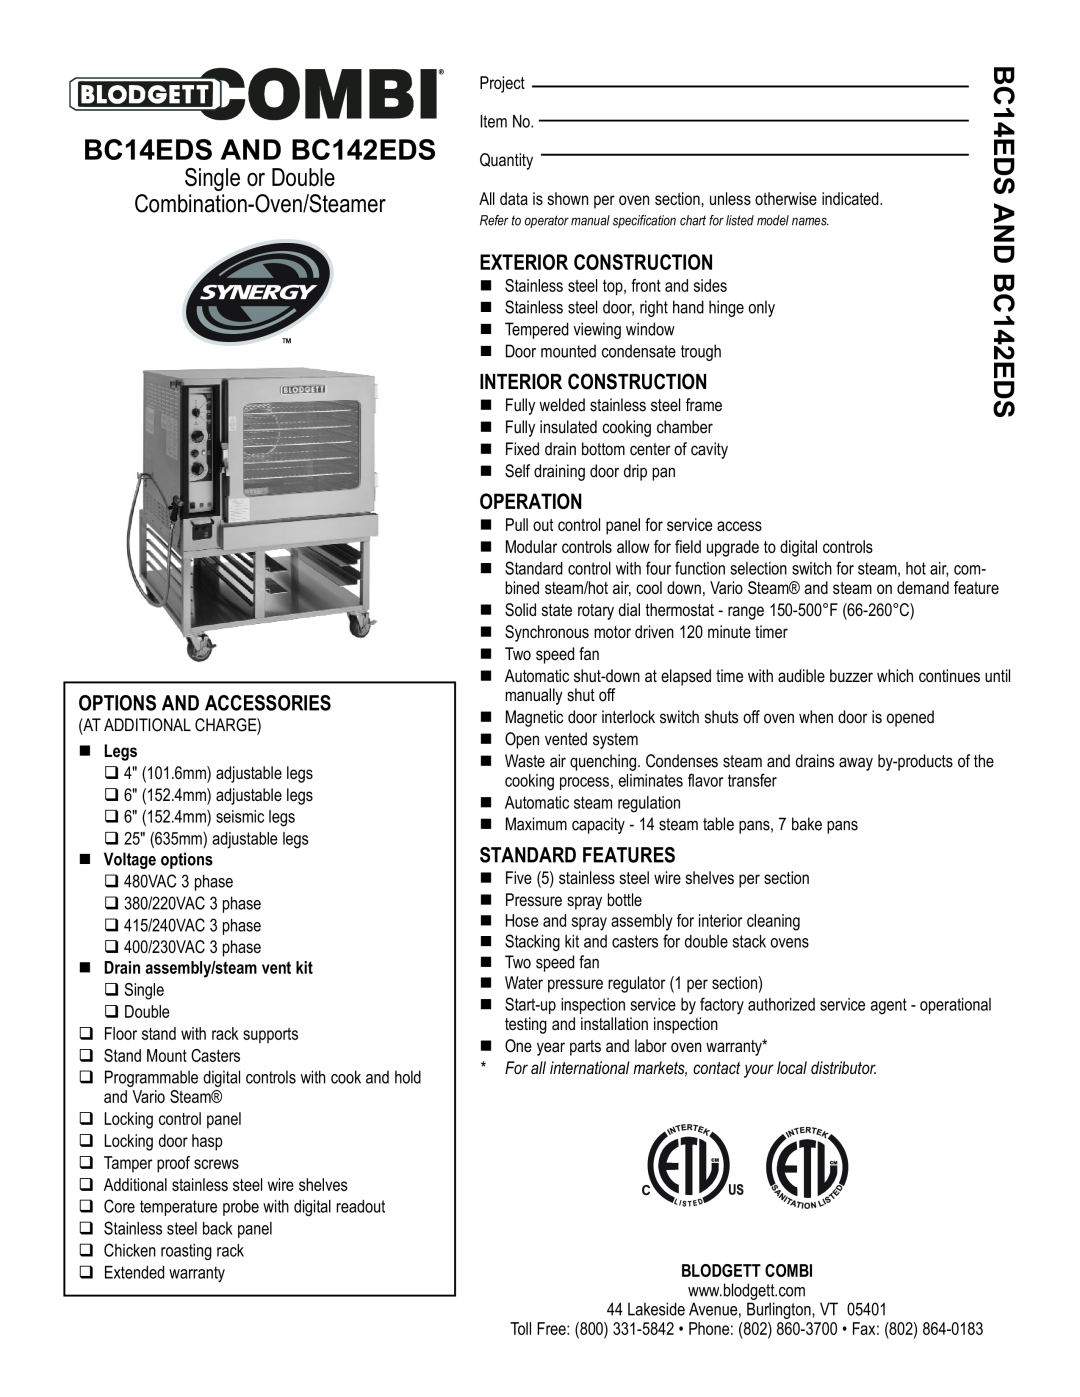 Blodgett warranty BC14EDS AND BC142EDS, Options And Accessories, Exterior Construction, Interior Construction, Legs 